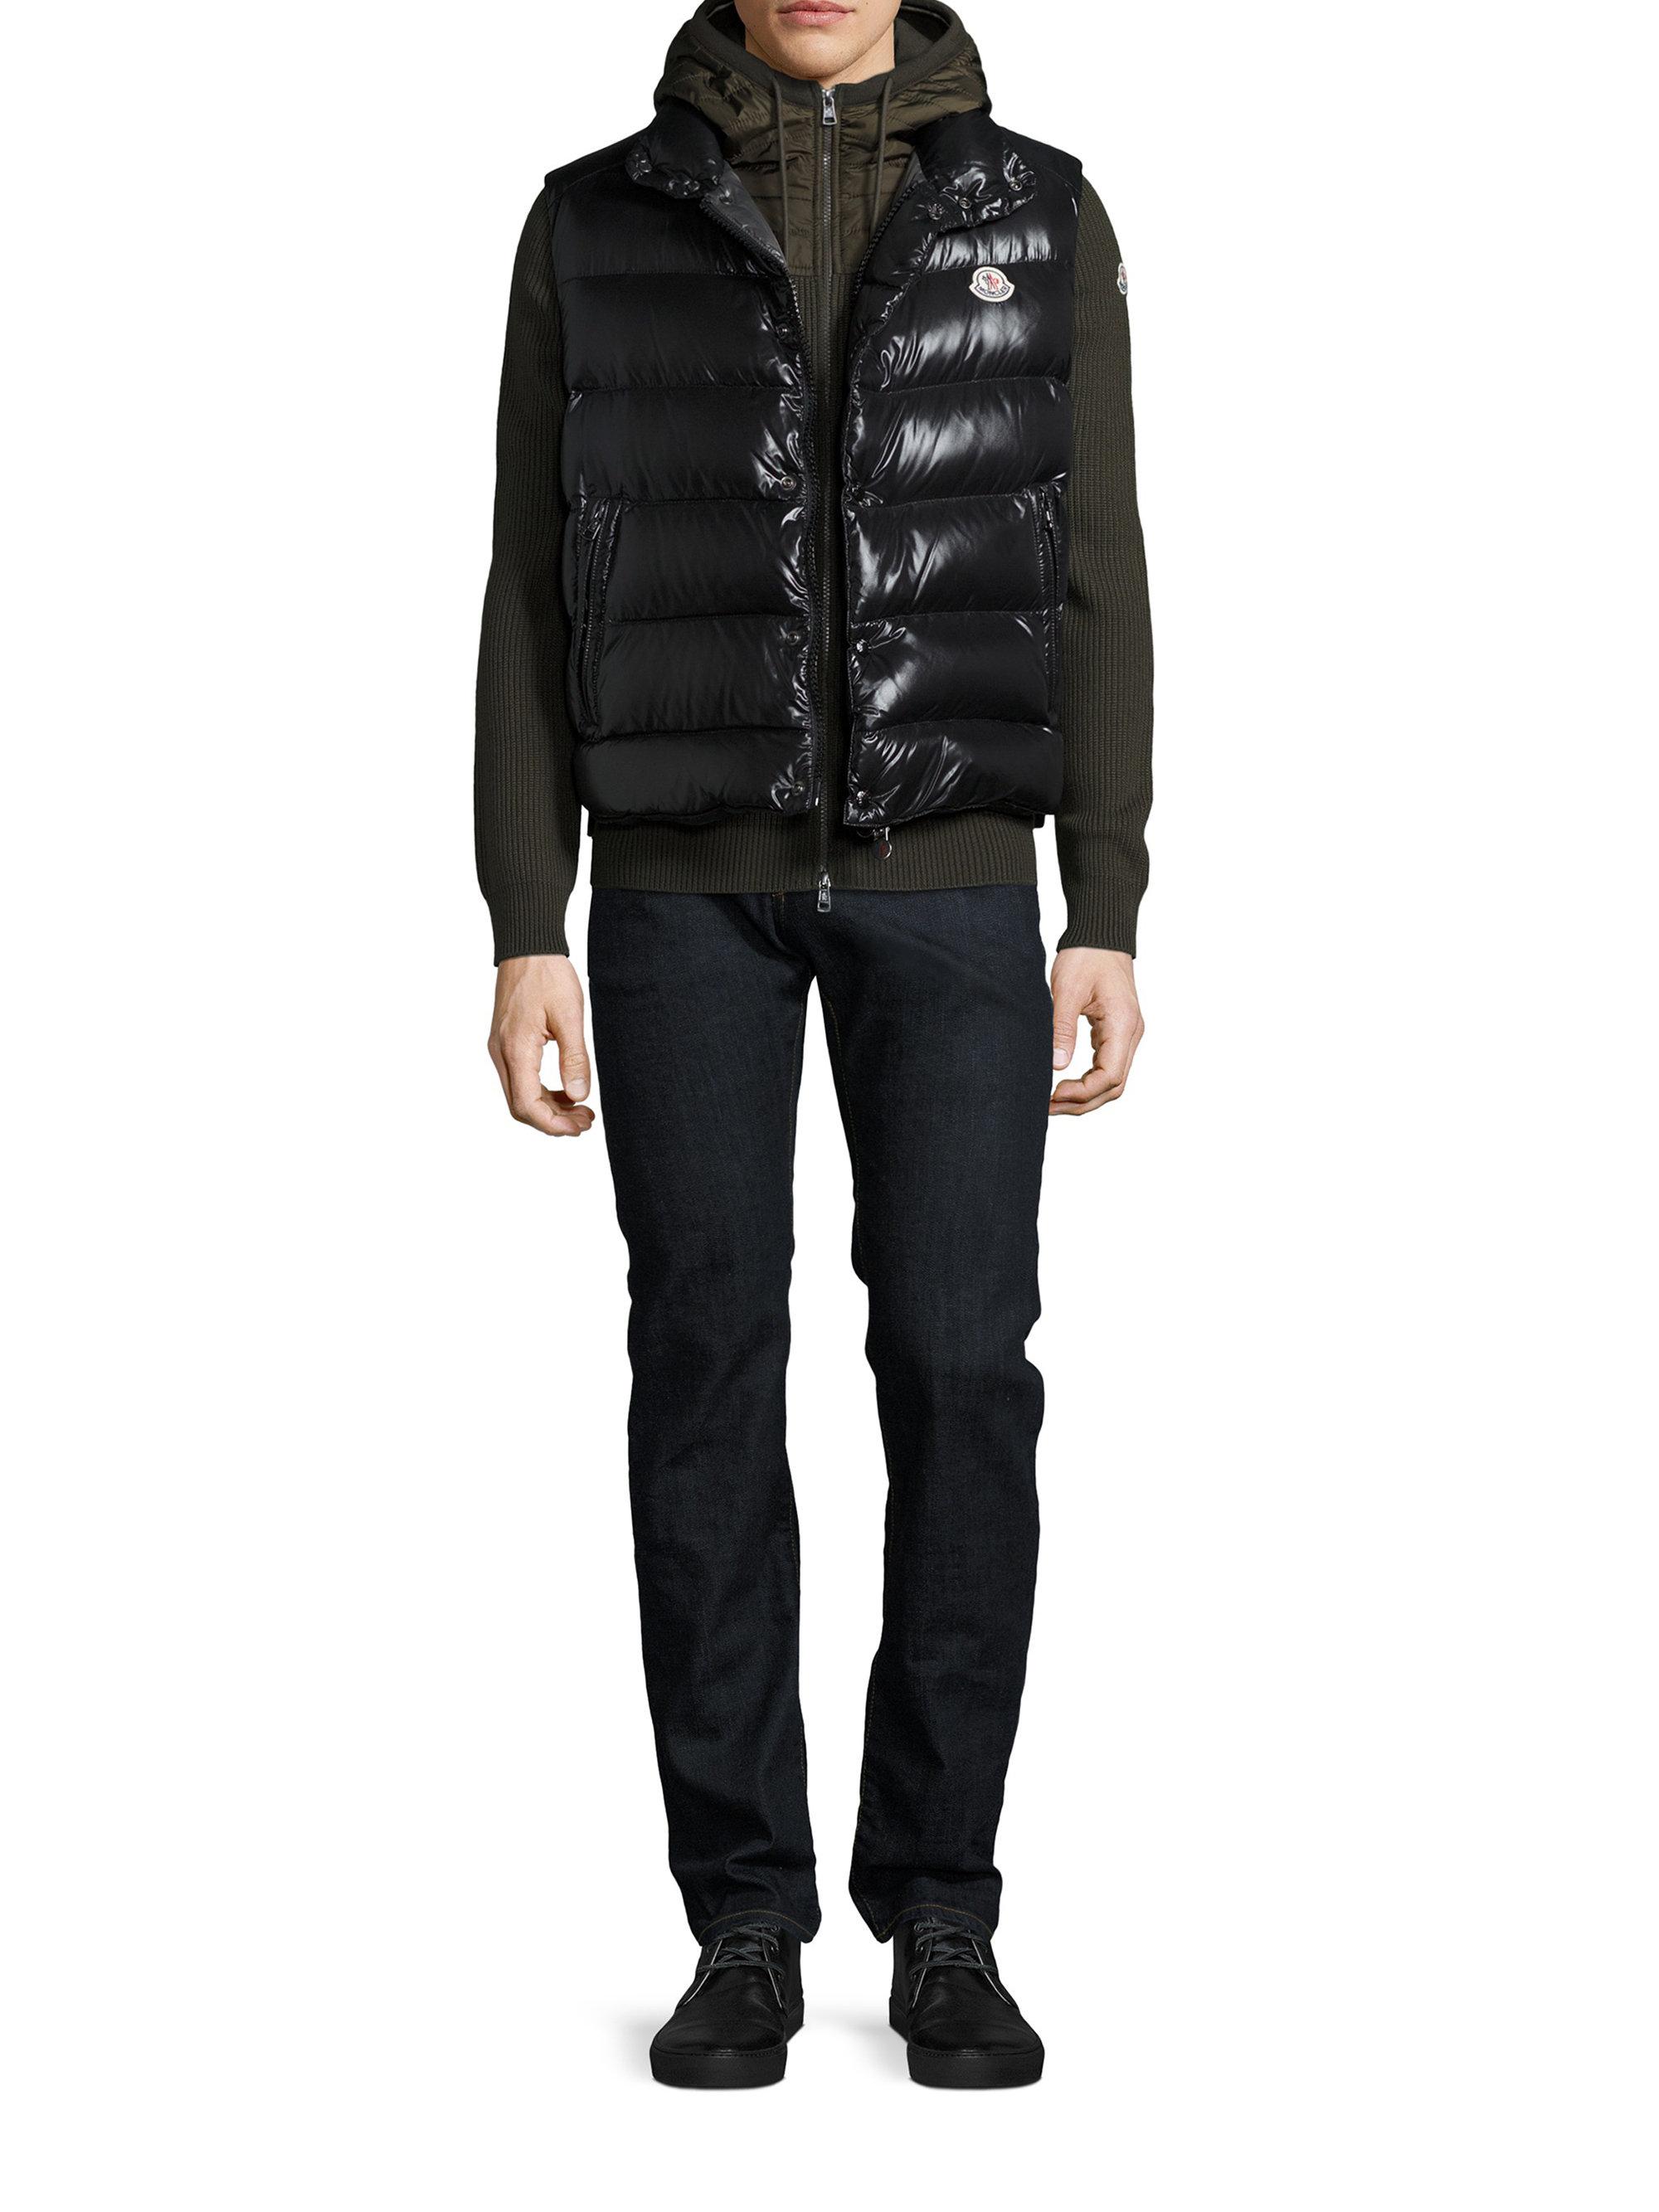 Moncler Synthetic Tib Down Puffer Vest in Black for Men - Lyst